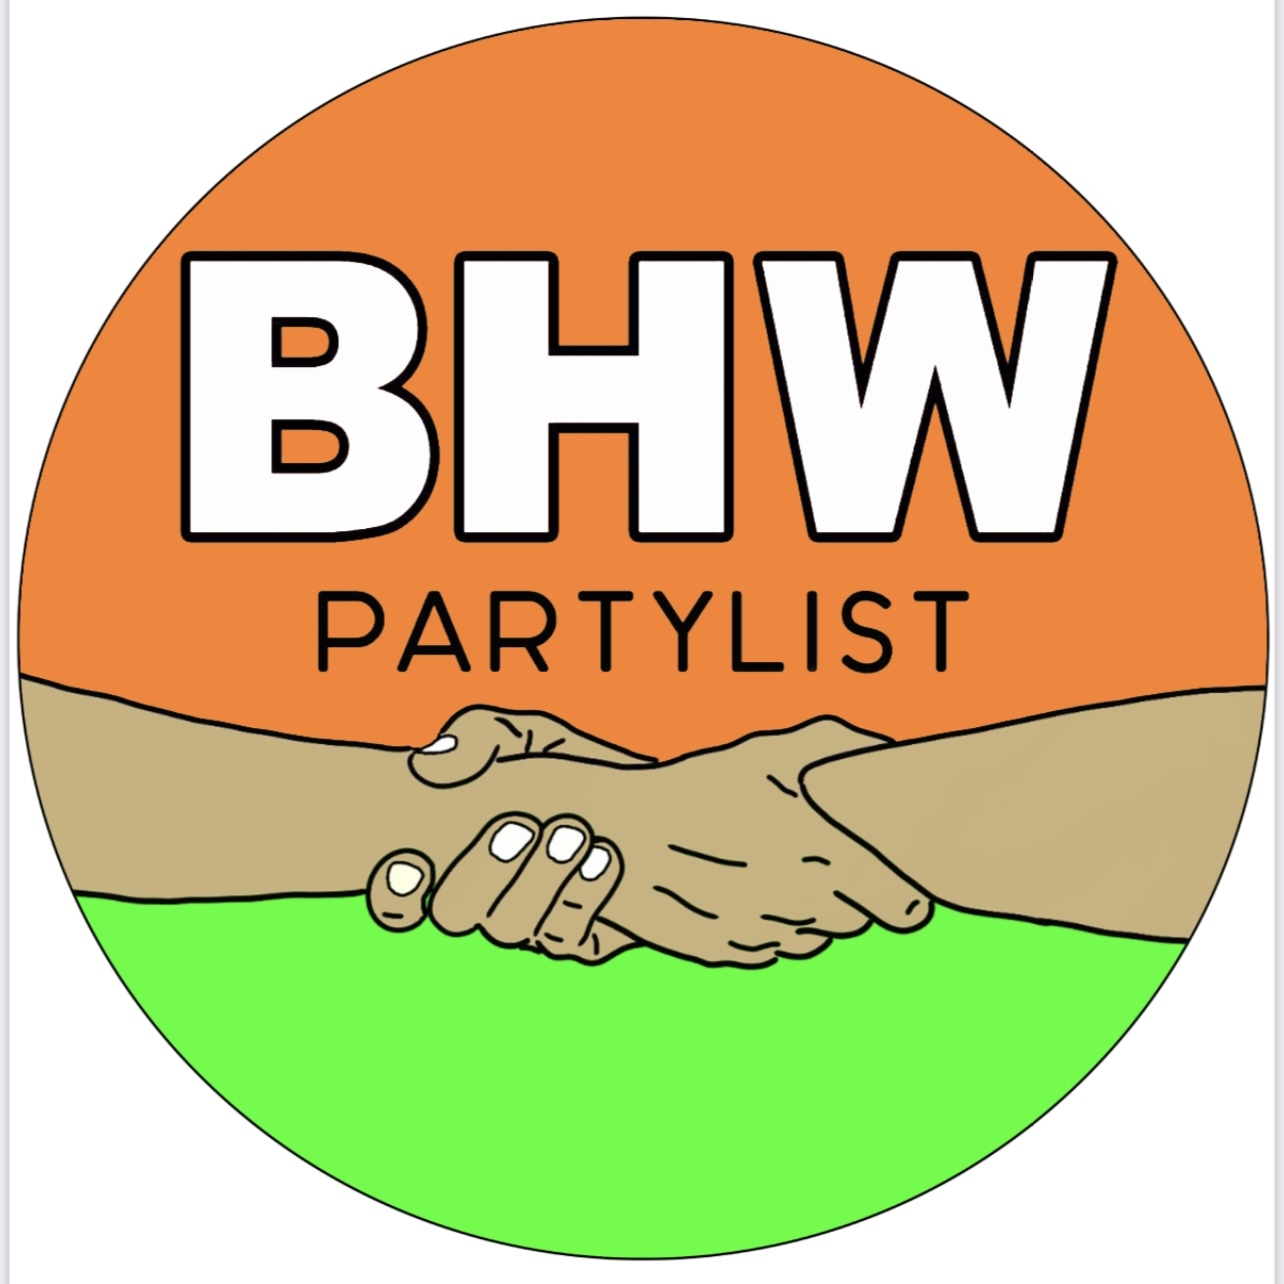 BHW Party list